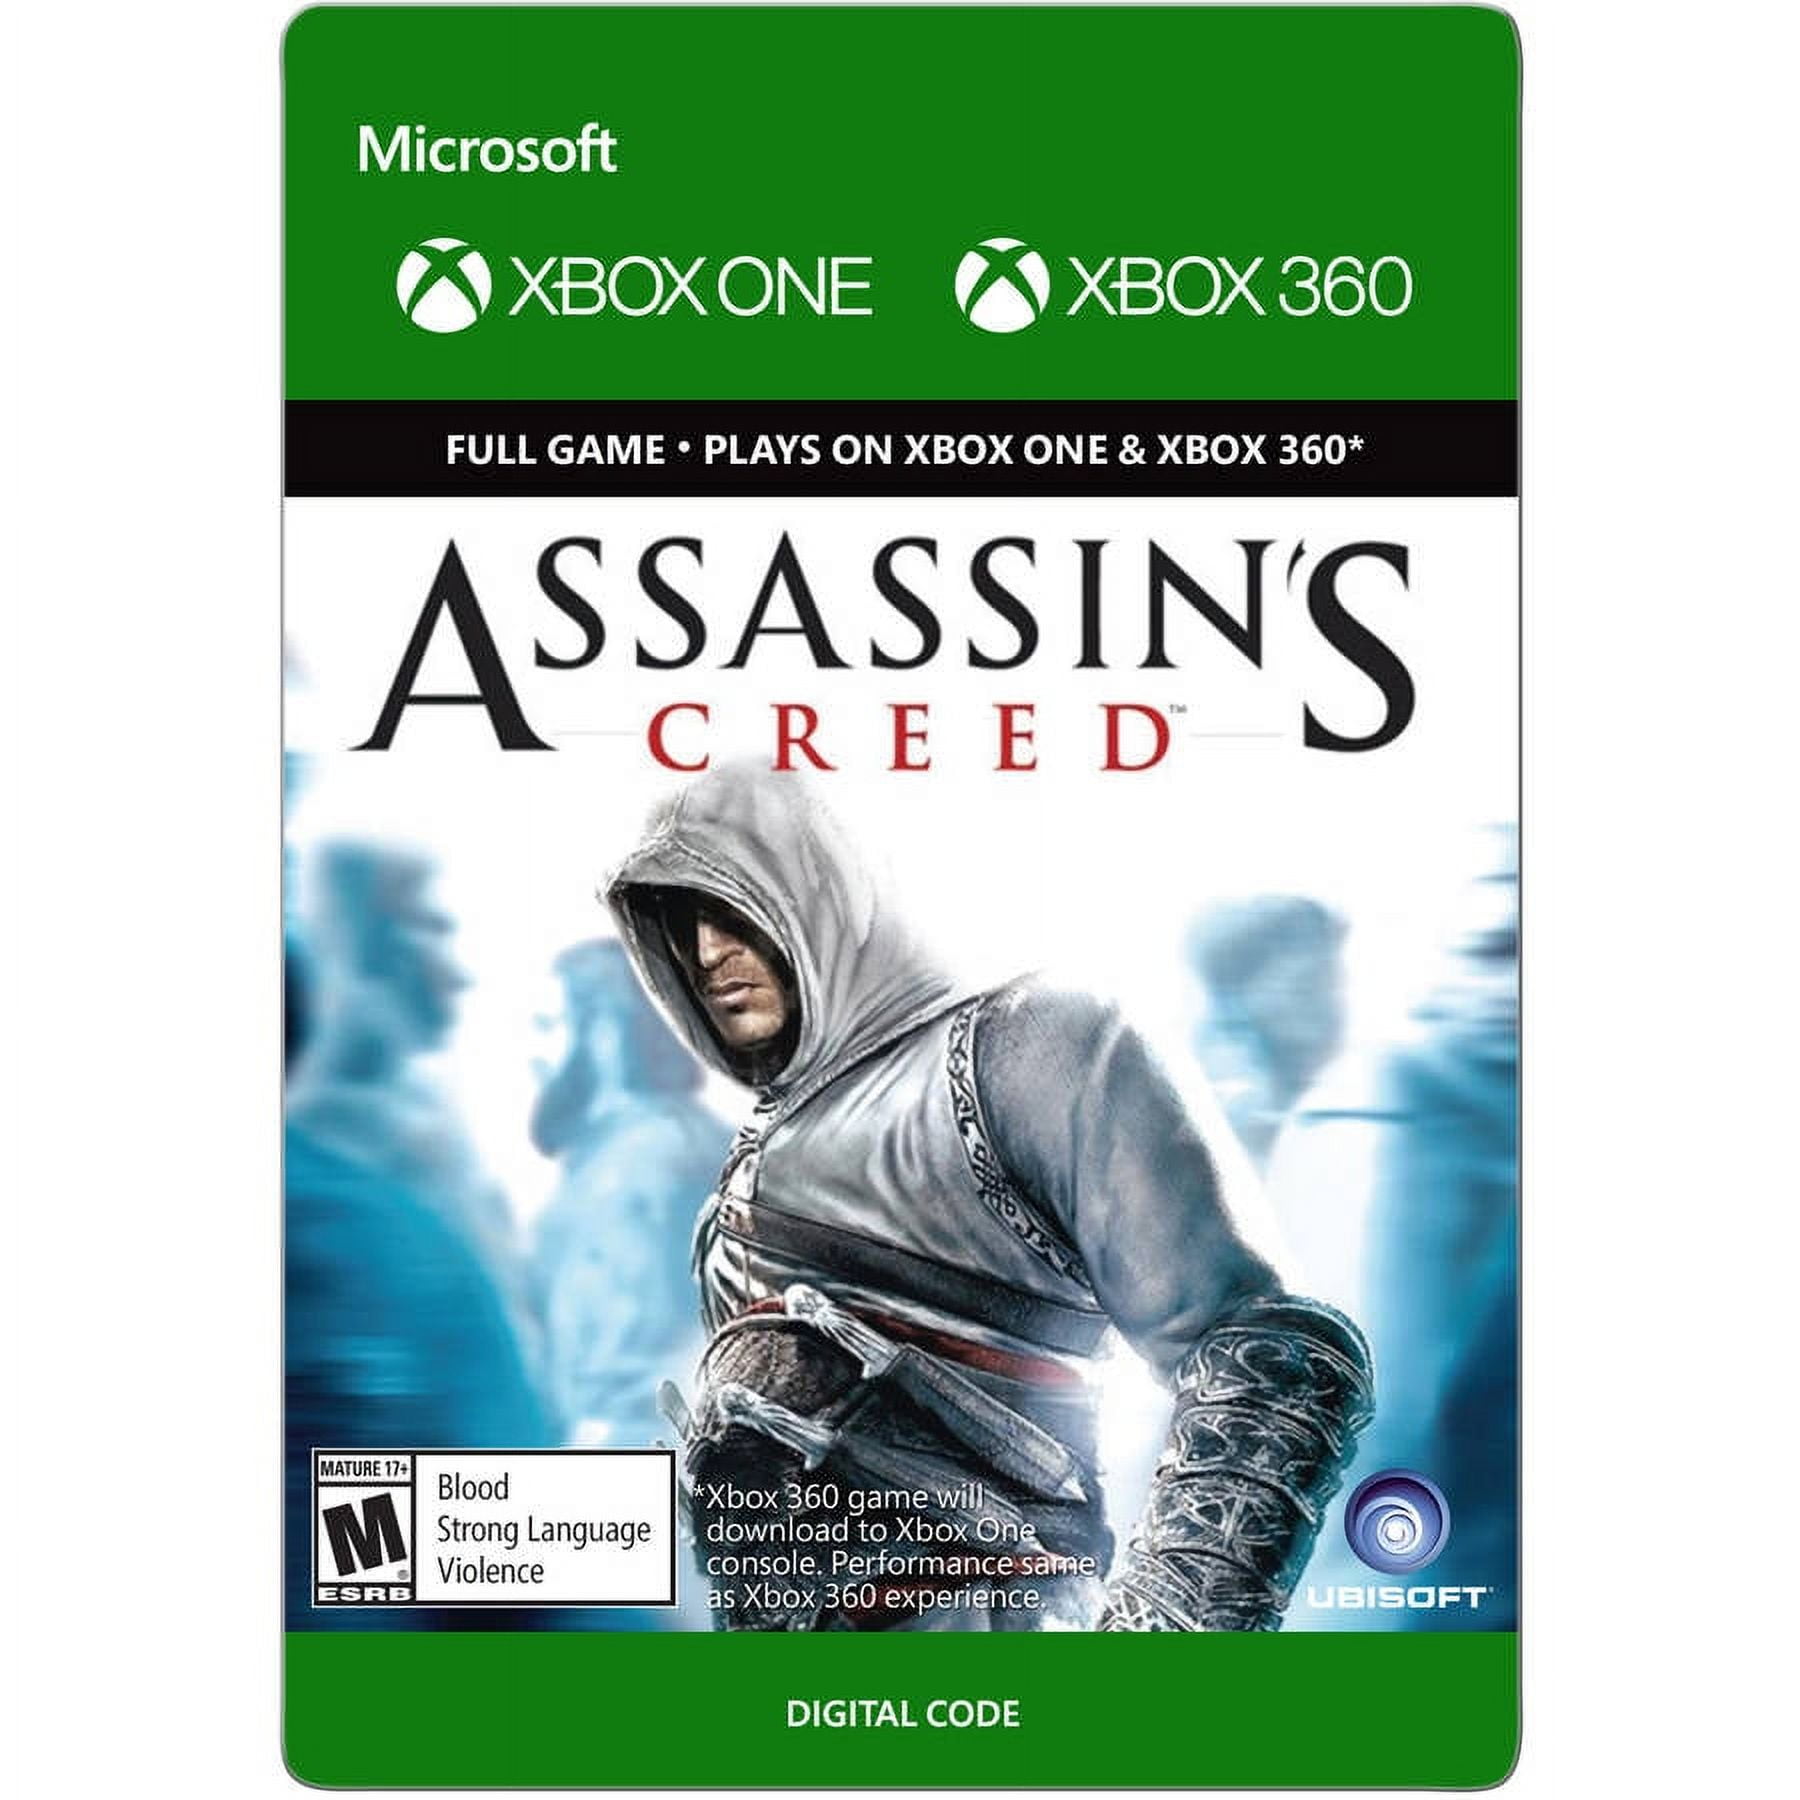 Xbox 360 - Assassin's Creed Revelations Microsoft Xbox 360 Complete #1 –  vandalsgaming